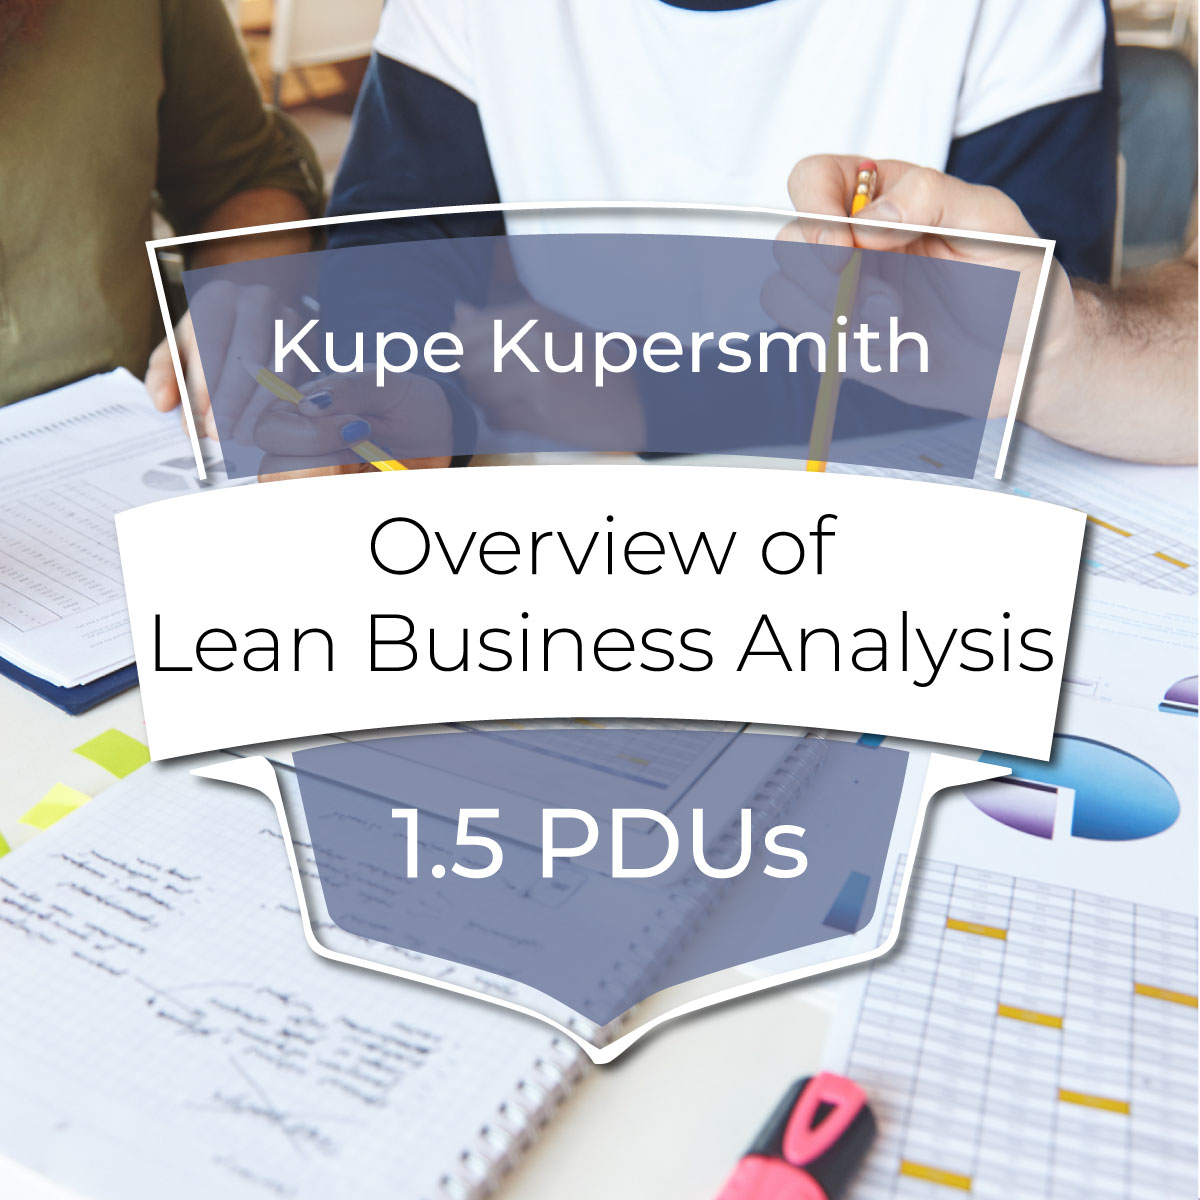 Overview of Lean Business Analysis